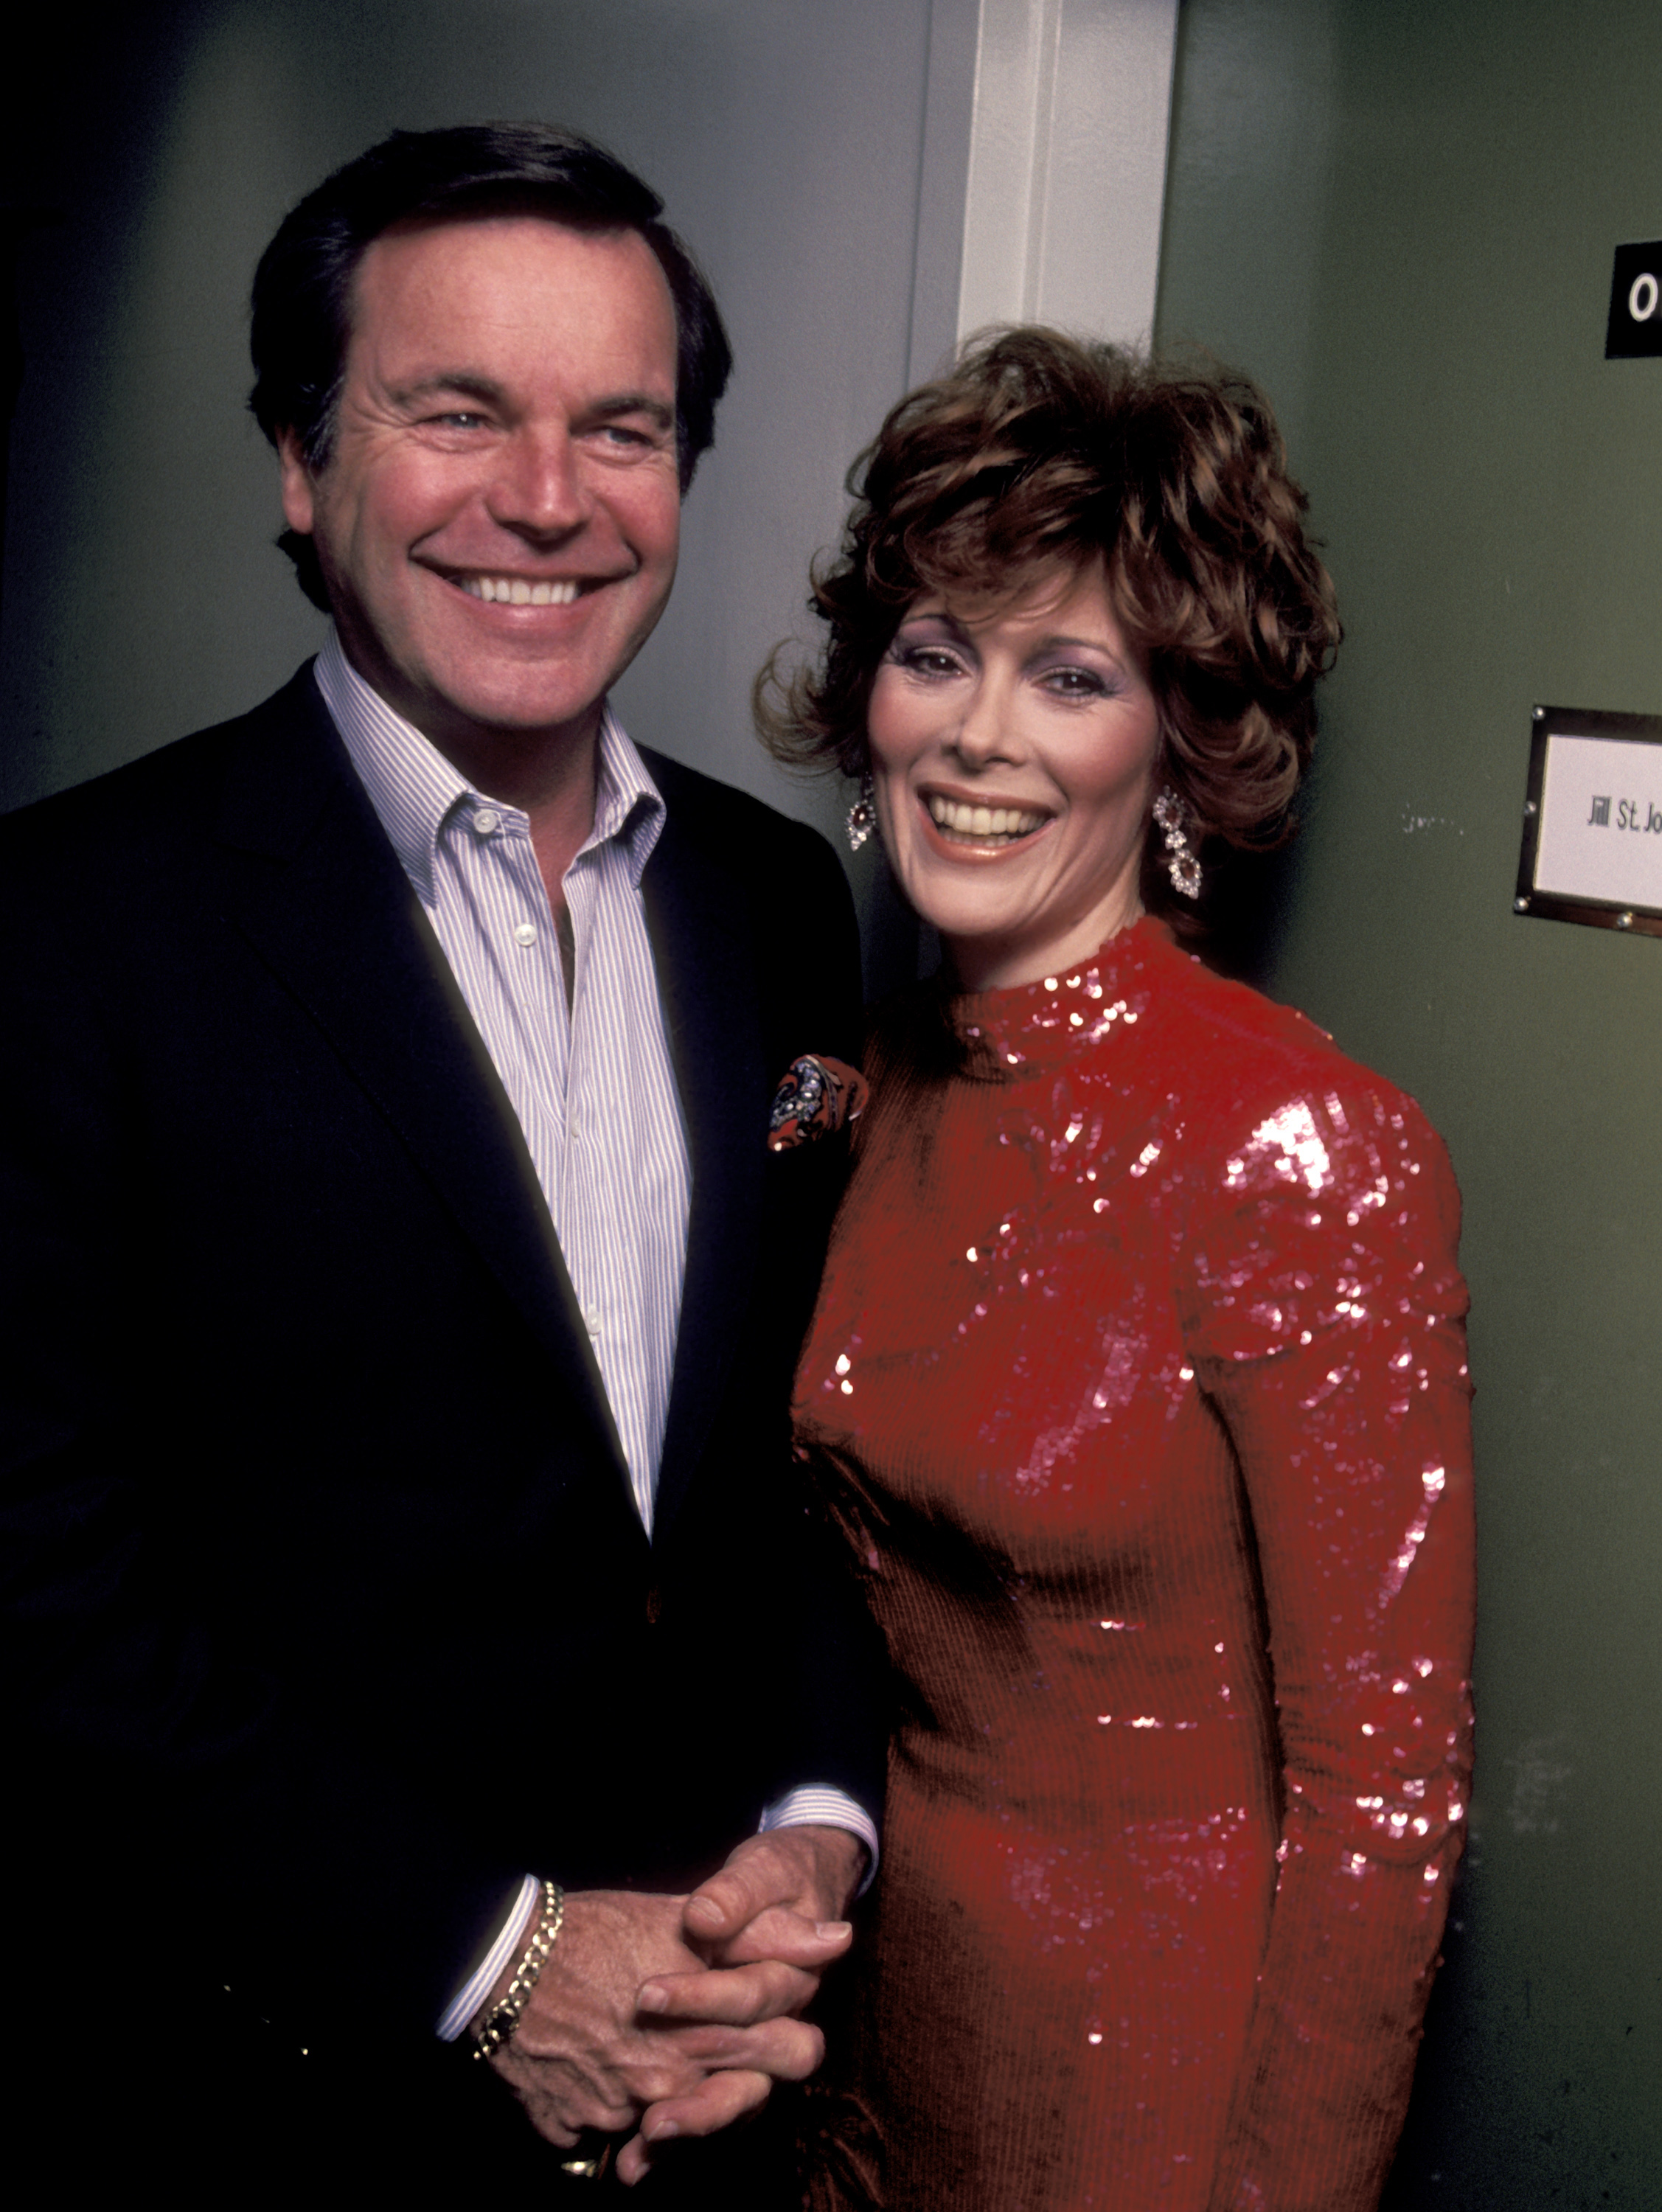 Robert Wagner and Jill St. John during the taping of the Bob Hope Special "The Road to Hollywood" at NBC Television Studios on February 20, 1983 in Burbank, California | Source: Getty Images